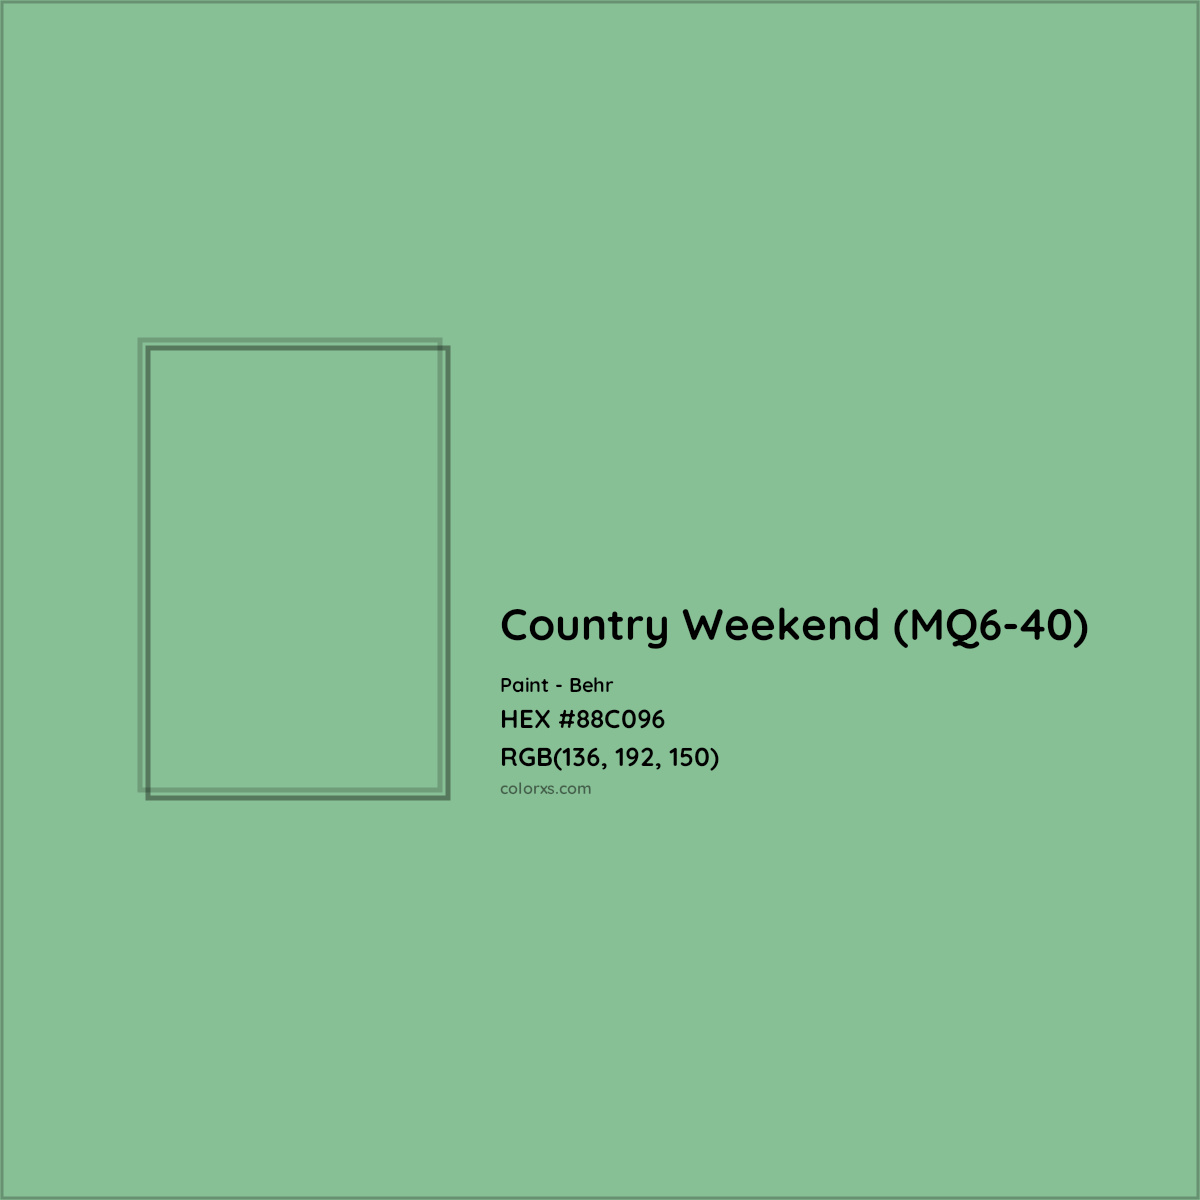 HEX #88C096 Country Weekend (MQ6-40) Paint Behr - Color Code